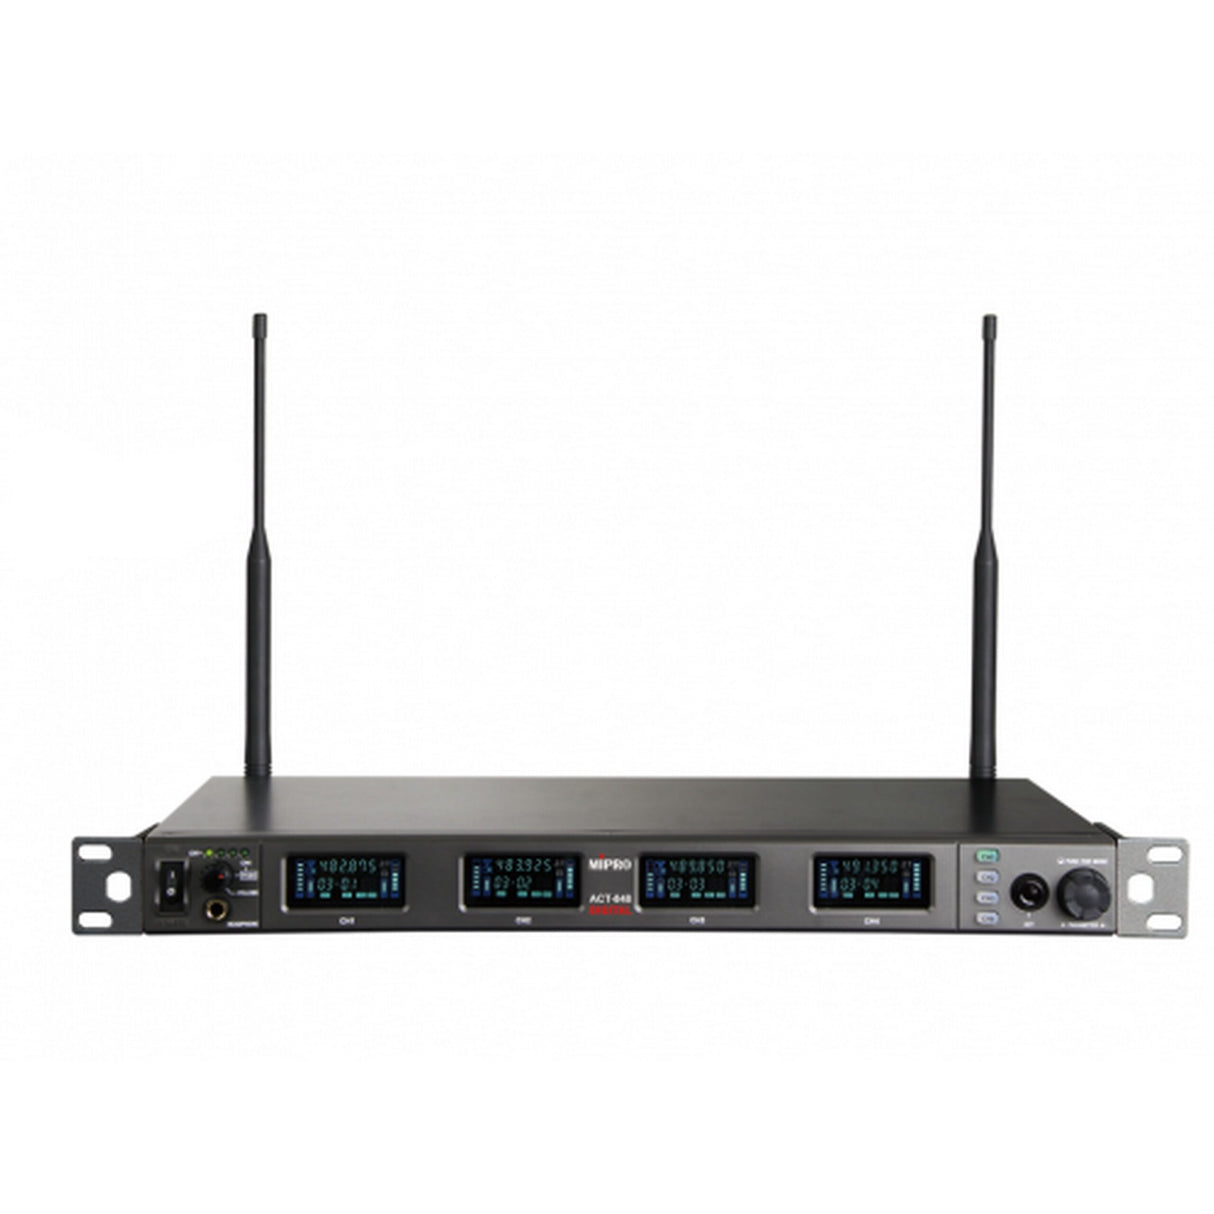 MIPRO ACT-848 1U Quad-Channel UHF Wideband Digital Receiver with Dante, 5F